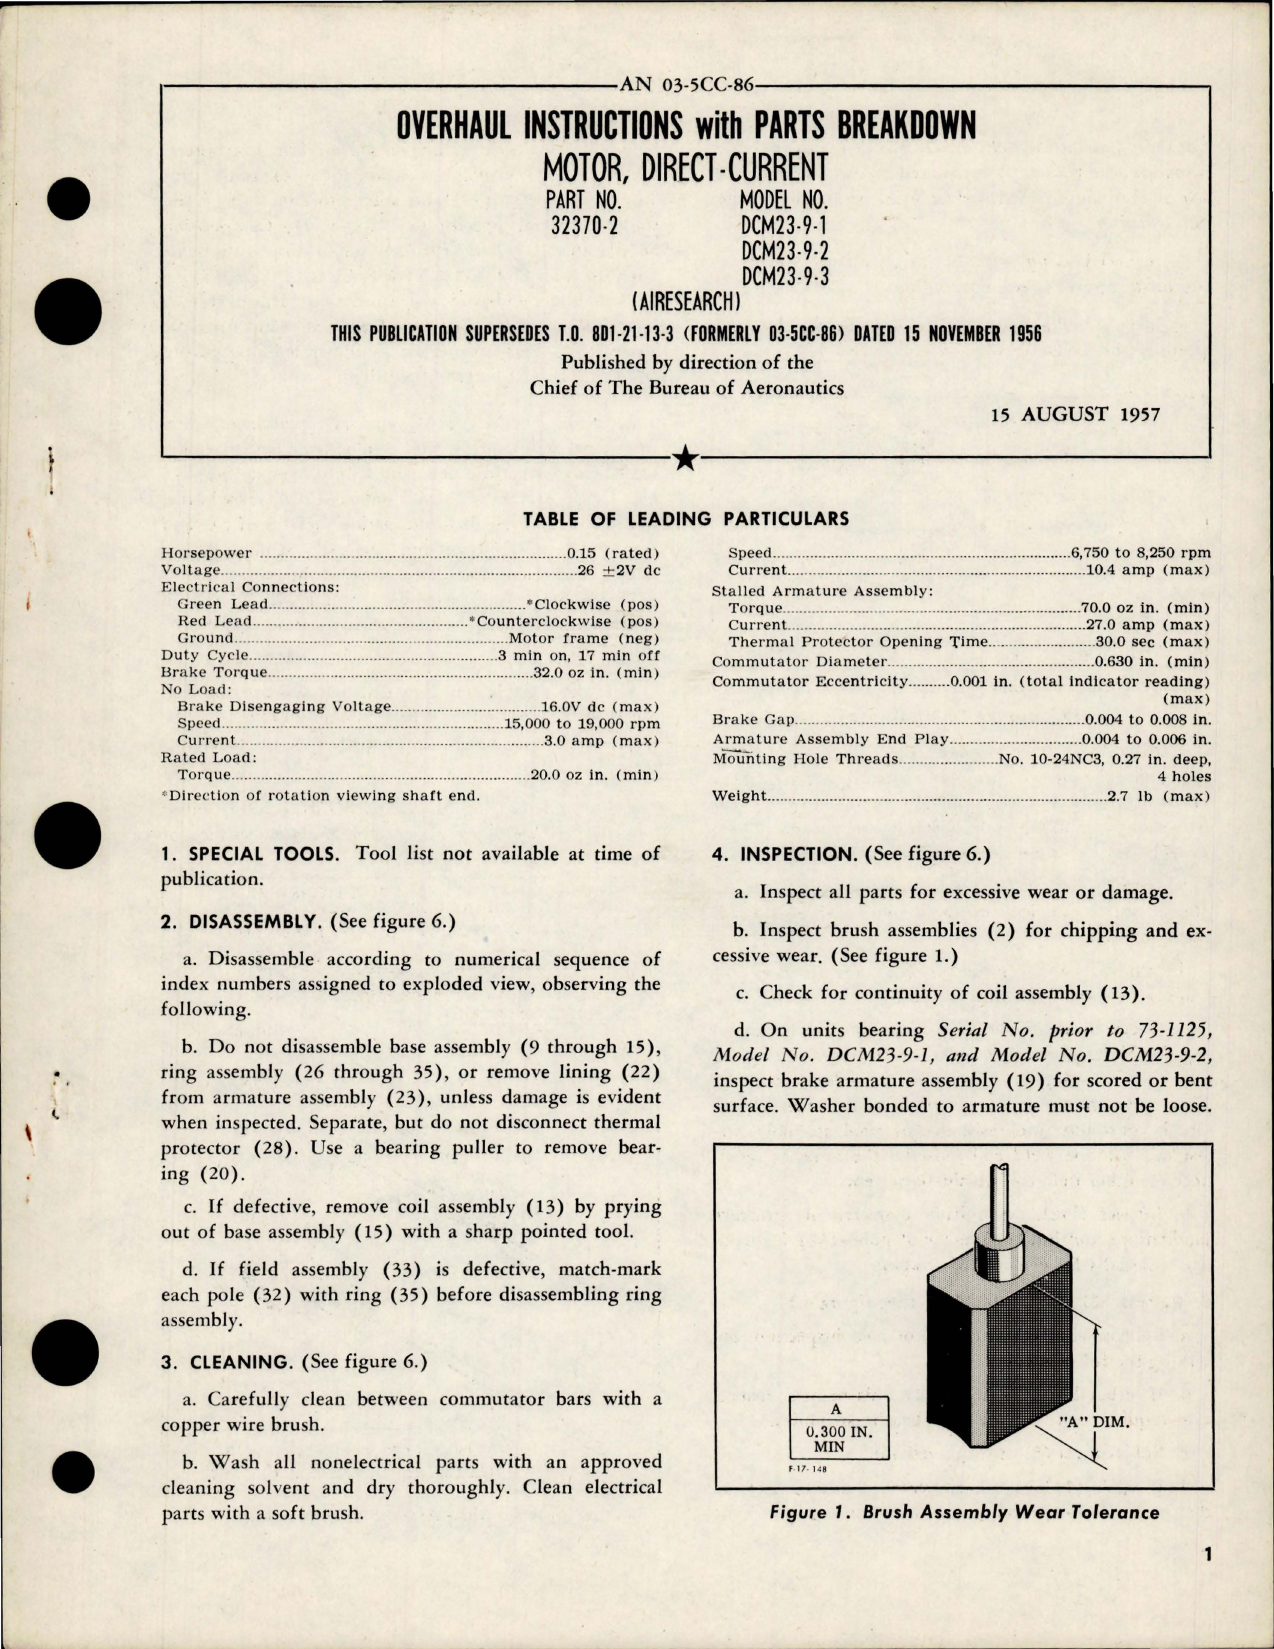 Sample page 1 from AirCorps Library document: Overhaul Instructions w Parts Breakdown for Direct Current Motor - Part 32370-2 